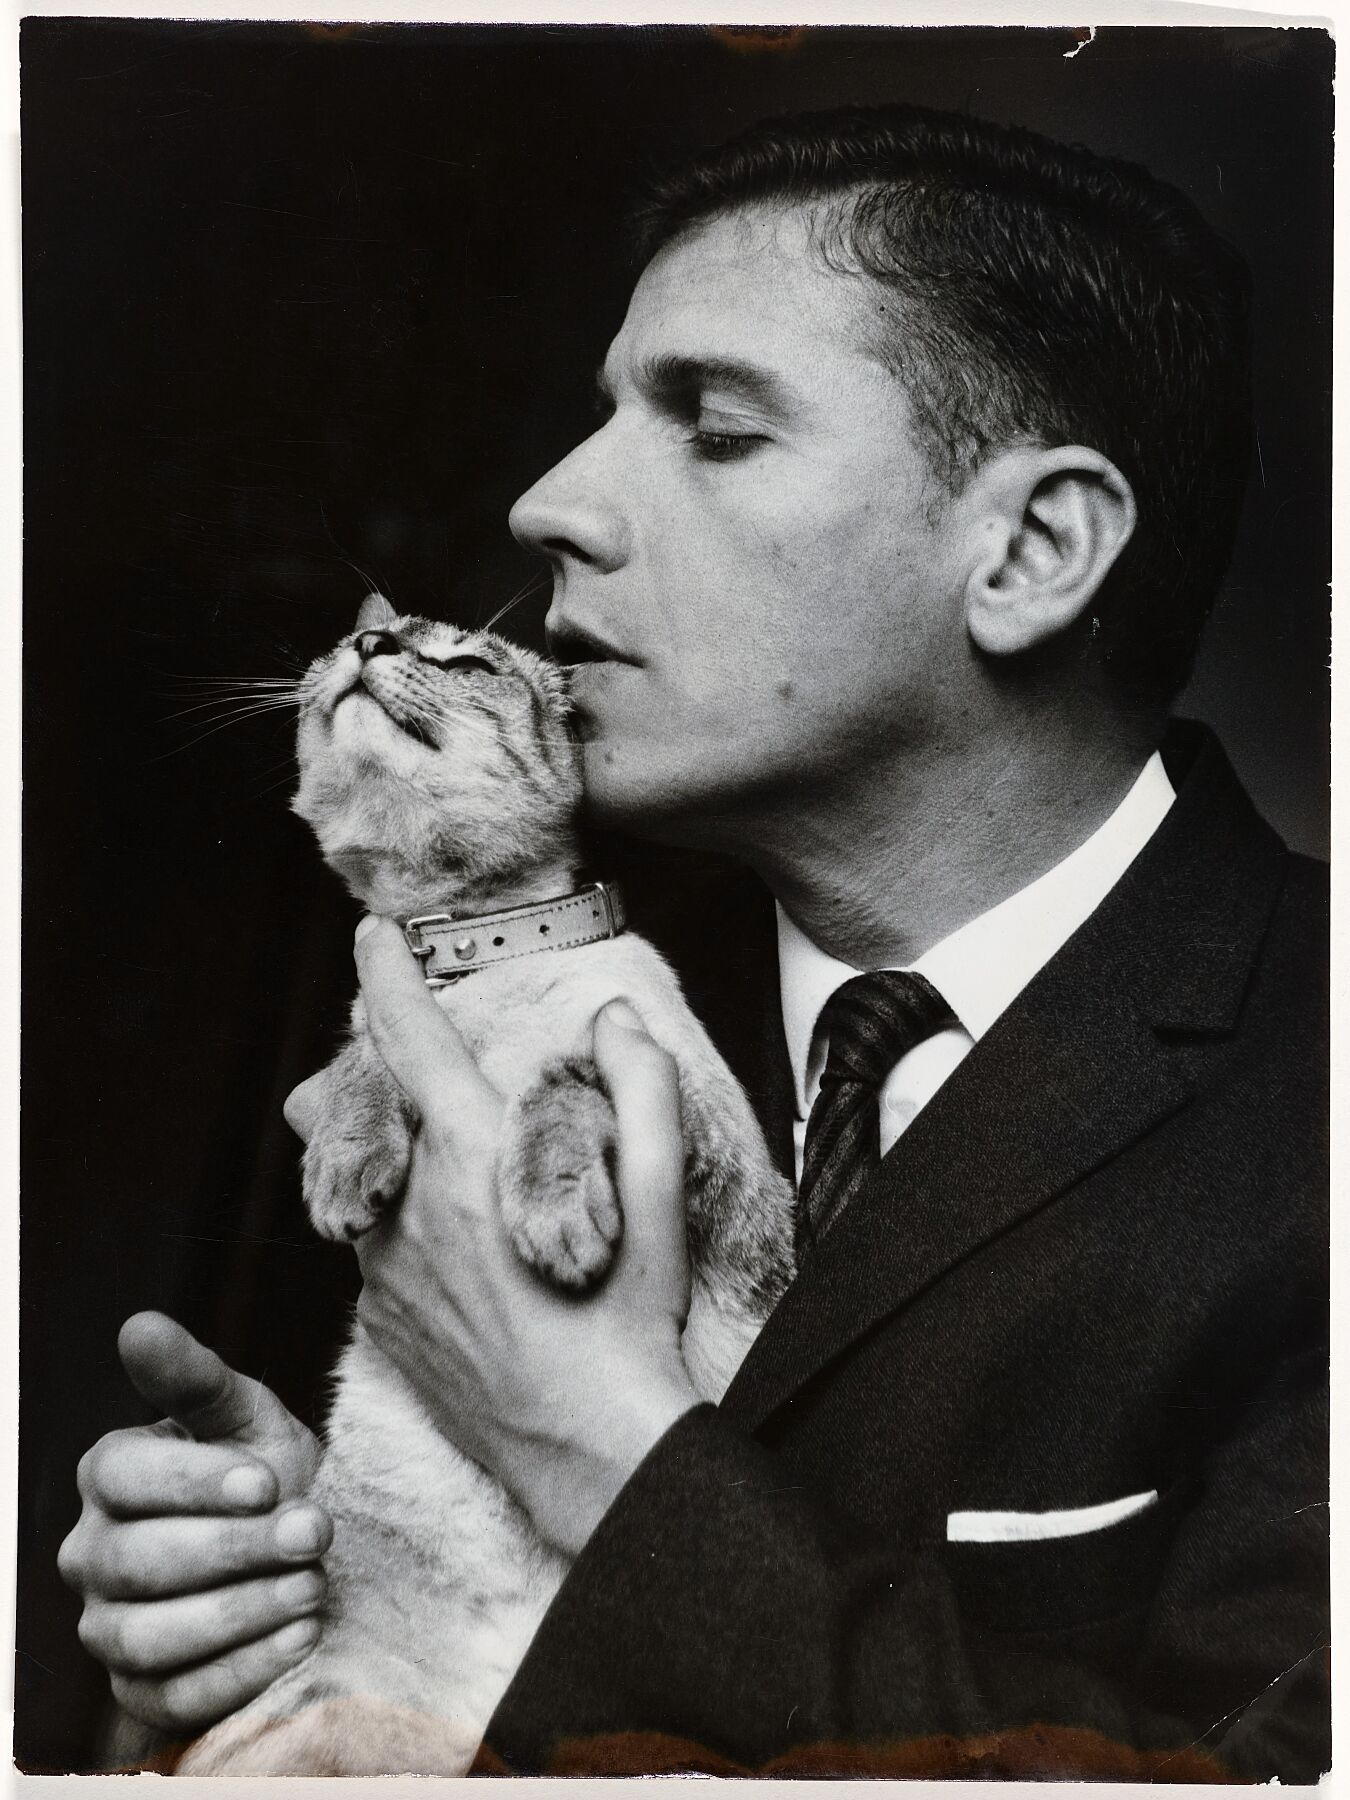 Gerard Reve with the half-Siamese cat Justine (named after De Sade), Anefo, 1968